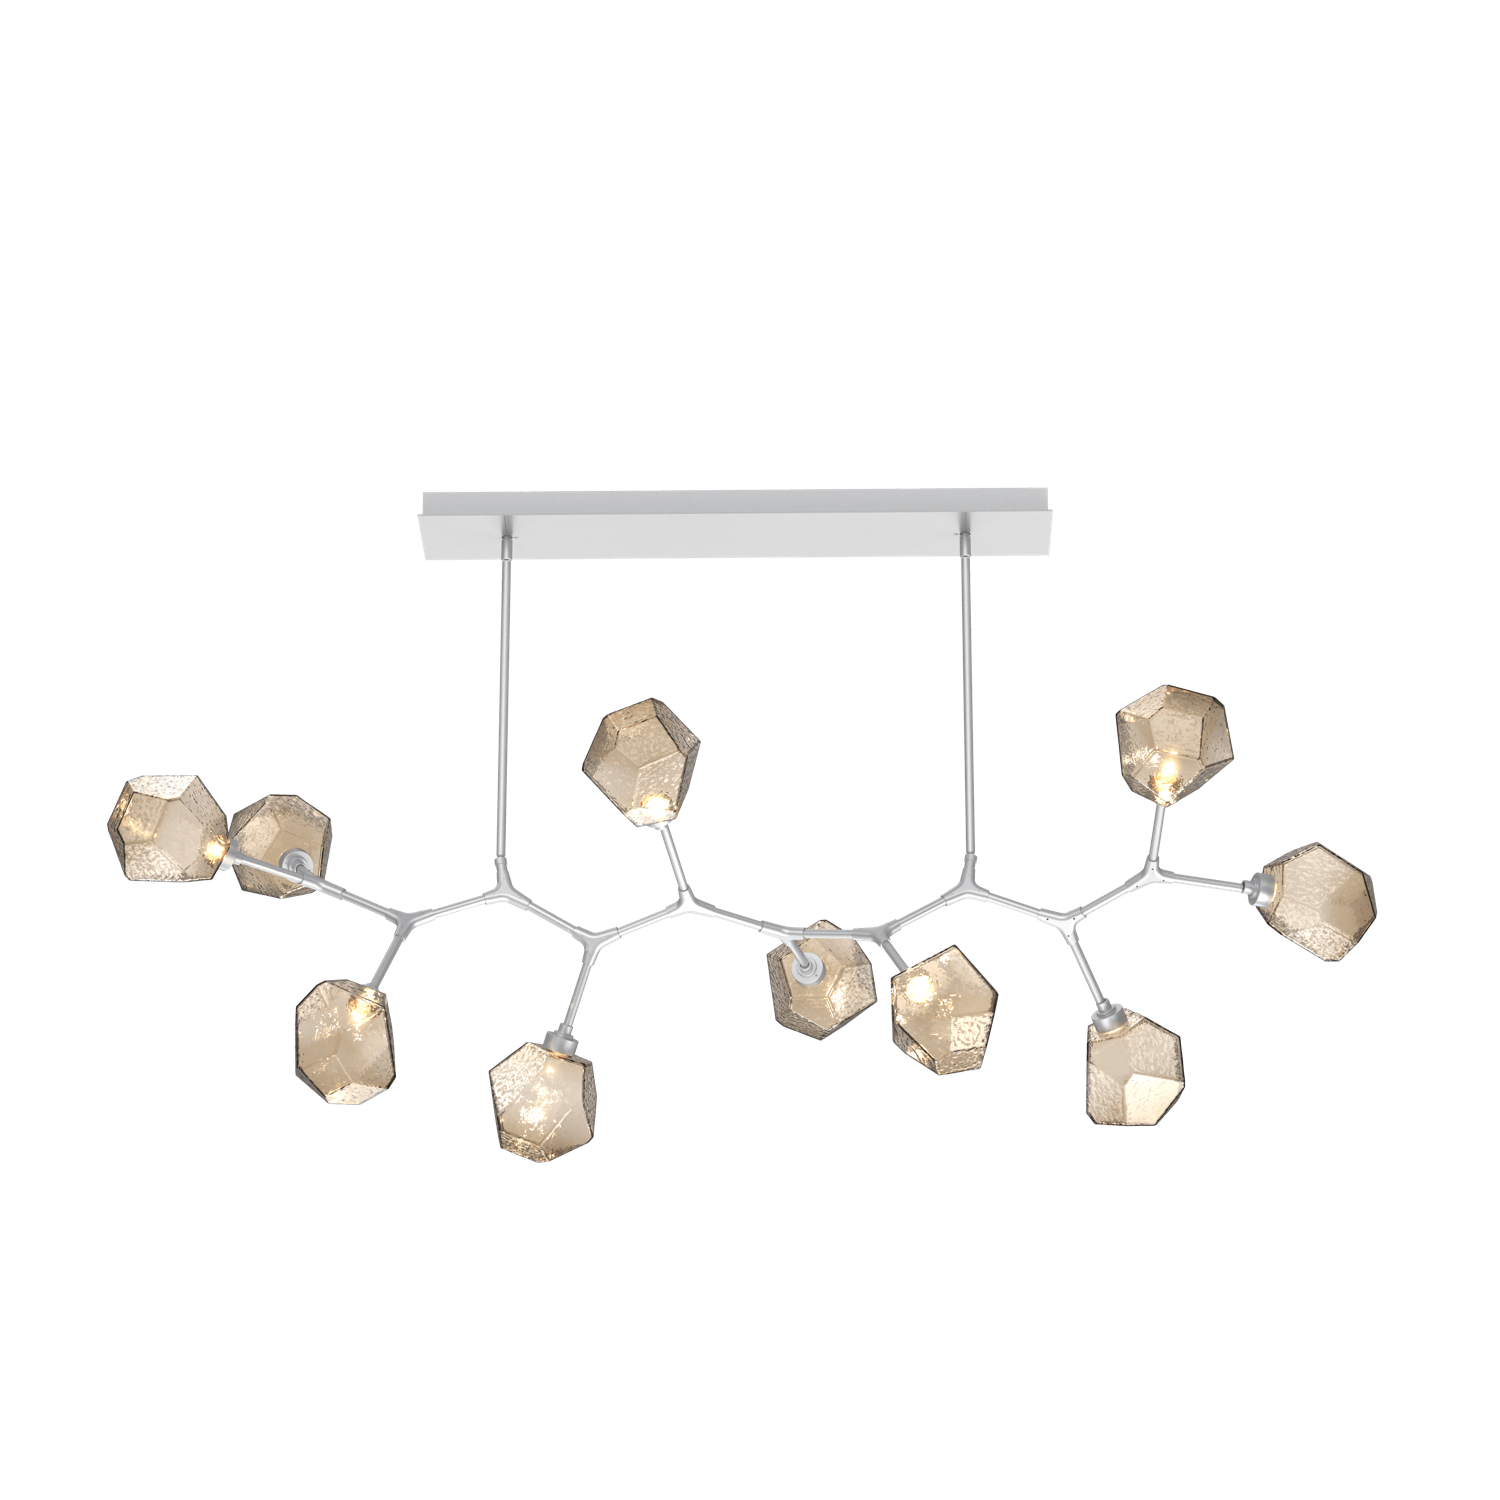 PLB0039-BC-CS-B-Hammerton-Studio-Gem-10-light-modern-branch-chandelier-with-classic-silver-finish-and-bronze-blown-glass-shades-and-LED-lamping